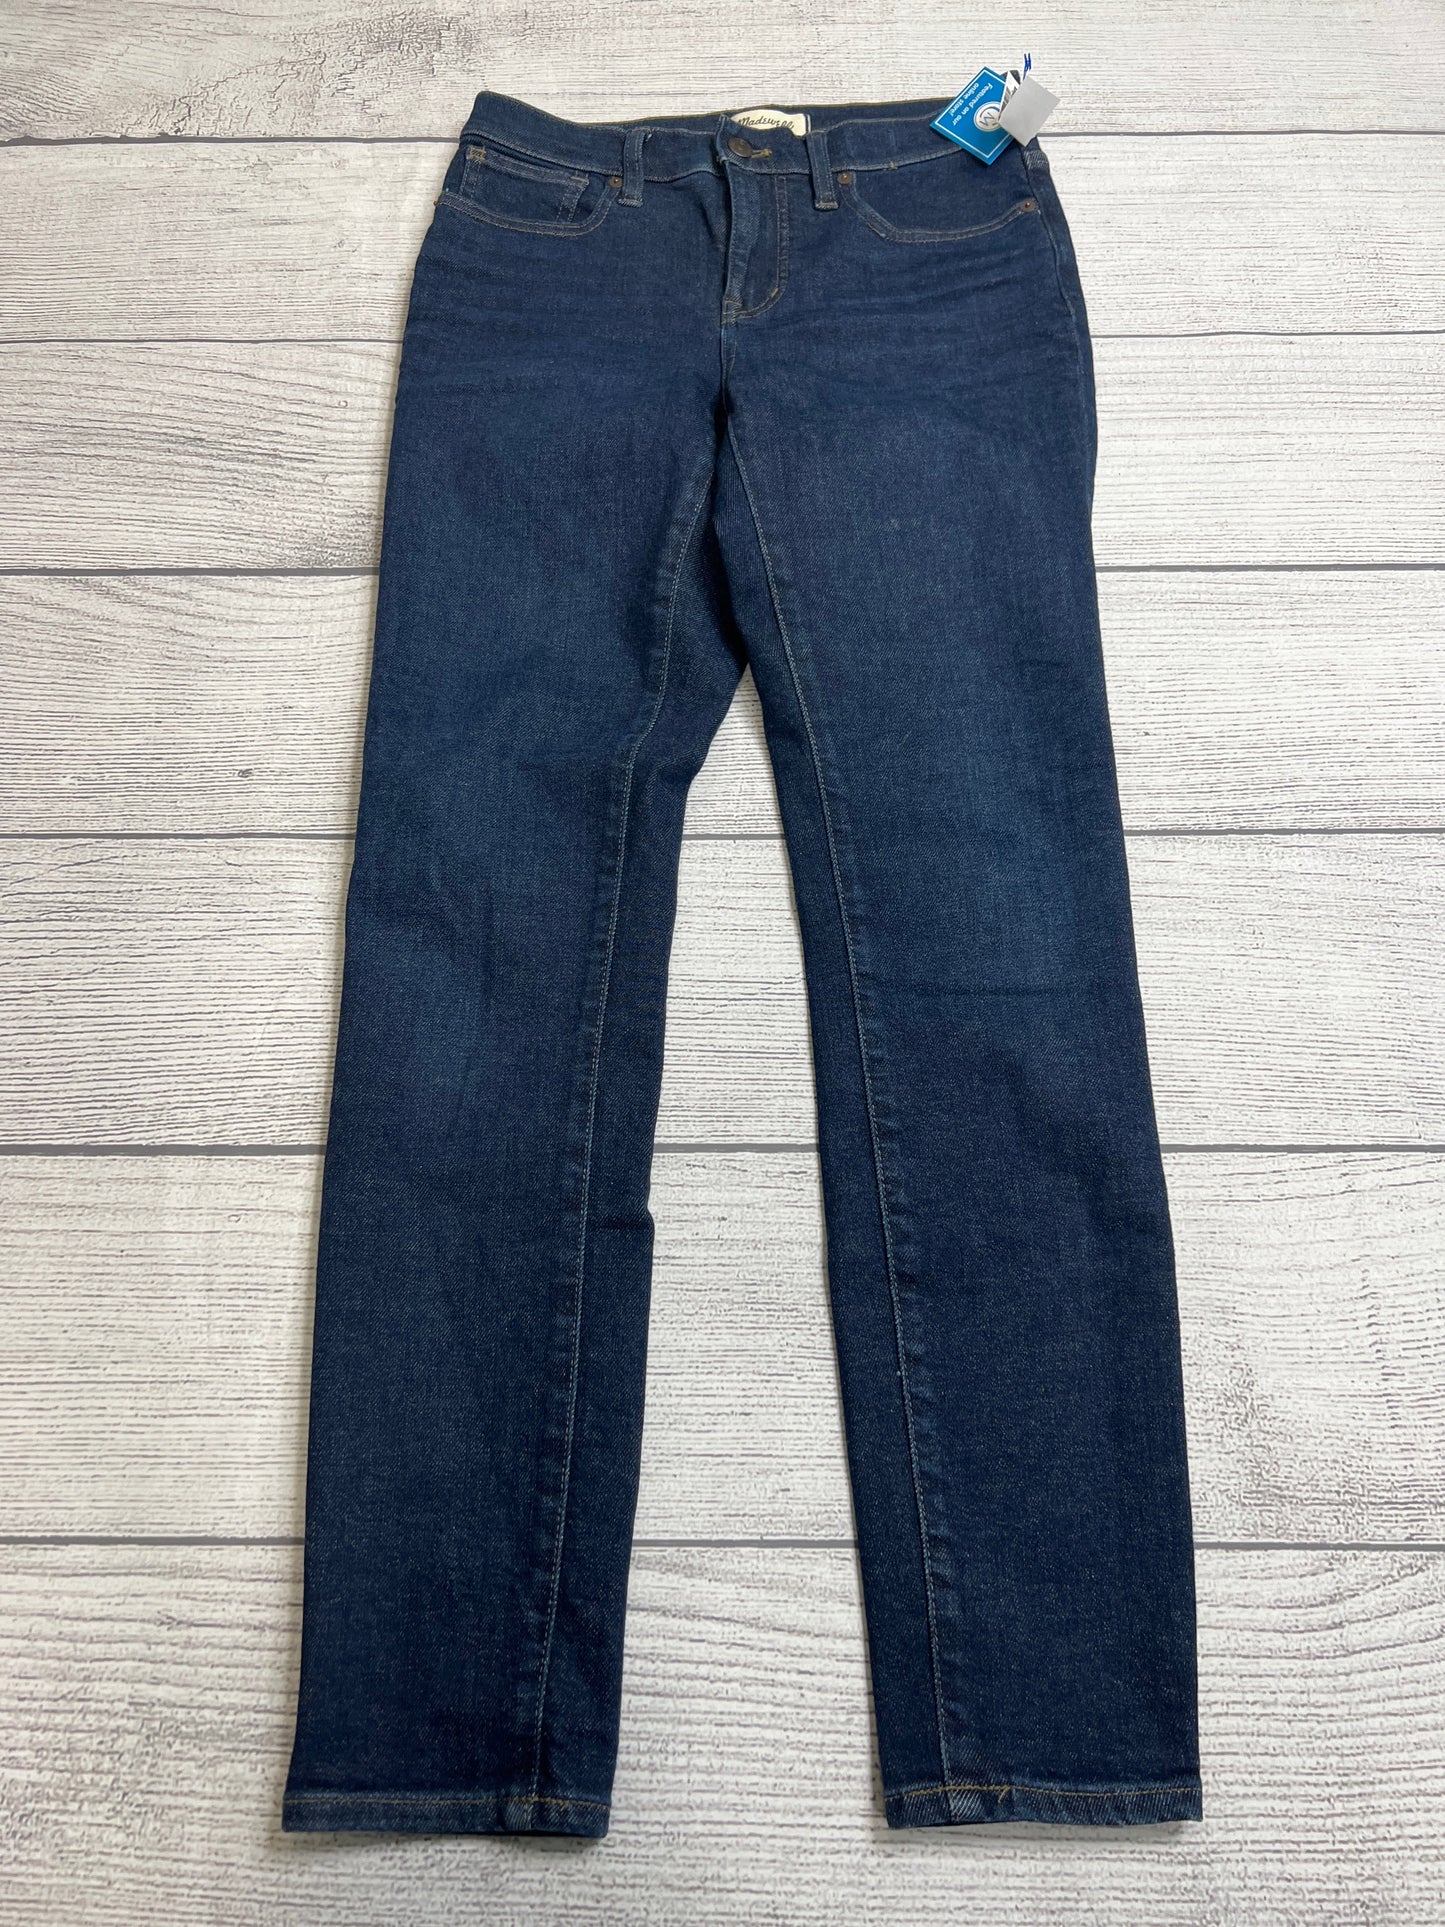 Jeans Skinny By Madewell  Size: 2/26